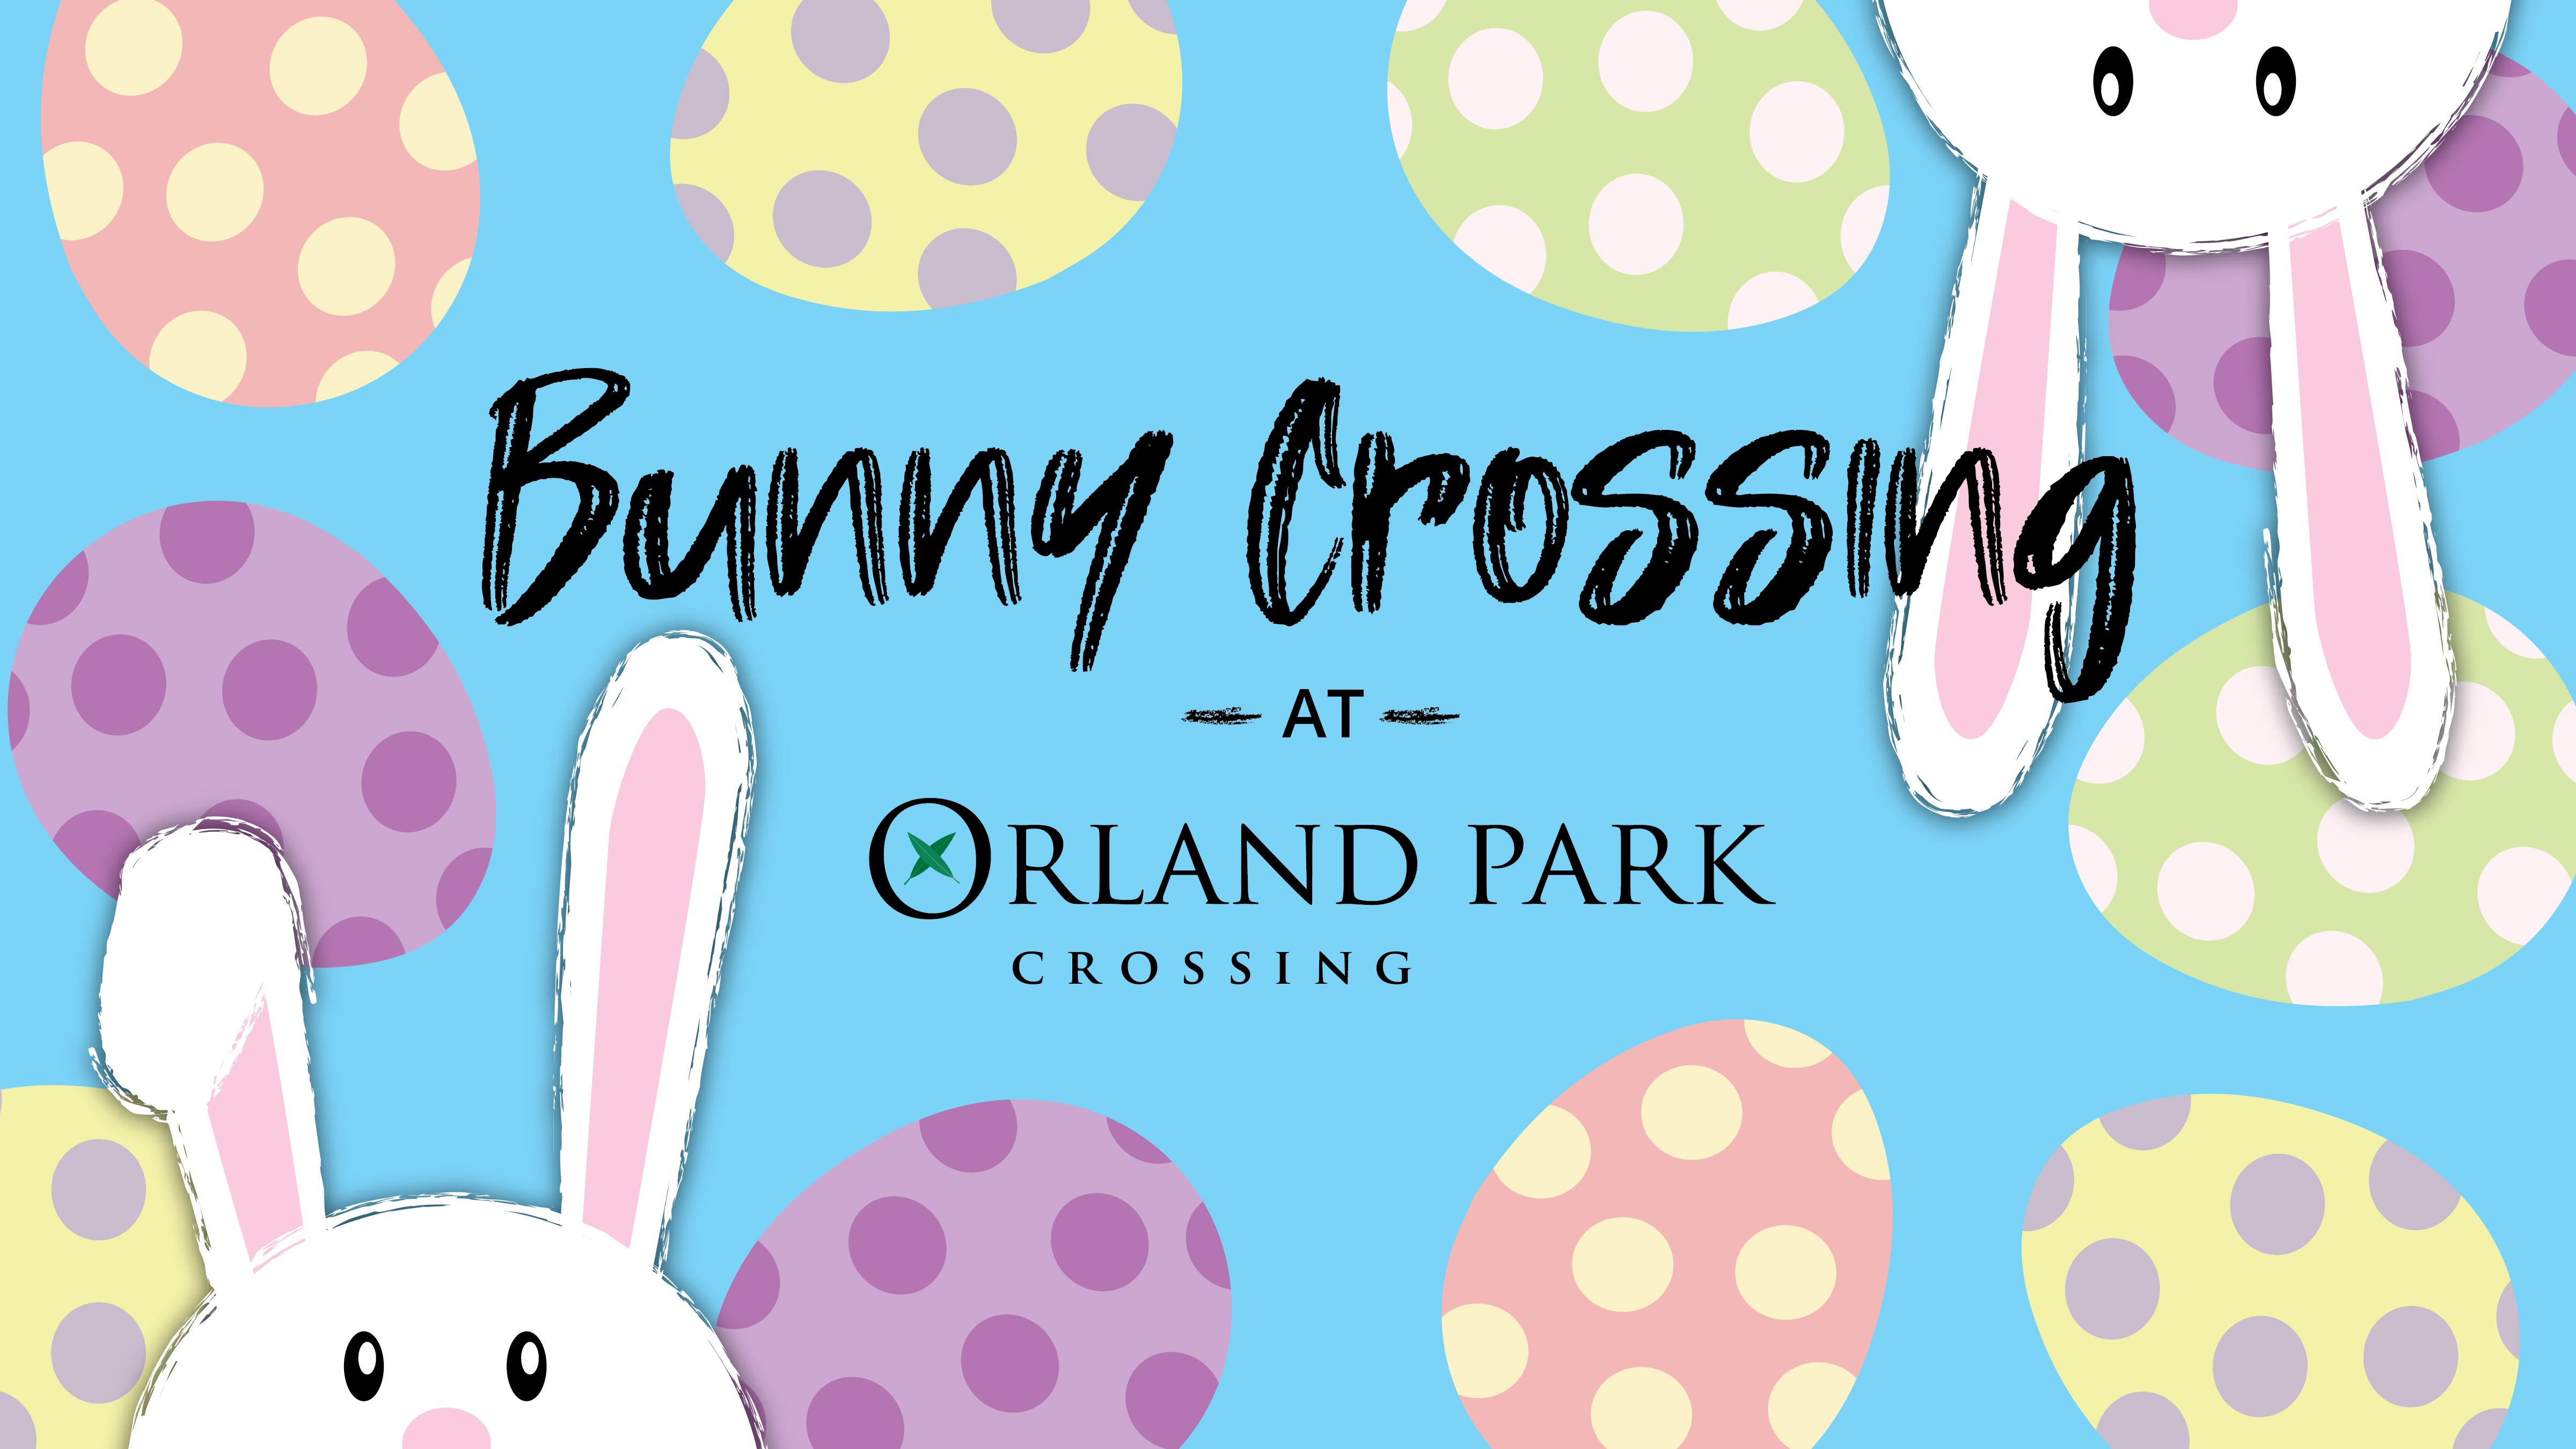 Bunny Crossing at Orland Park Crossing